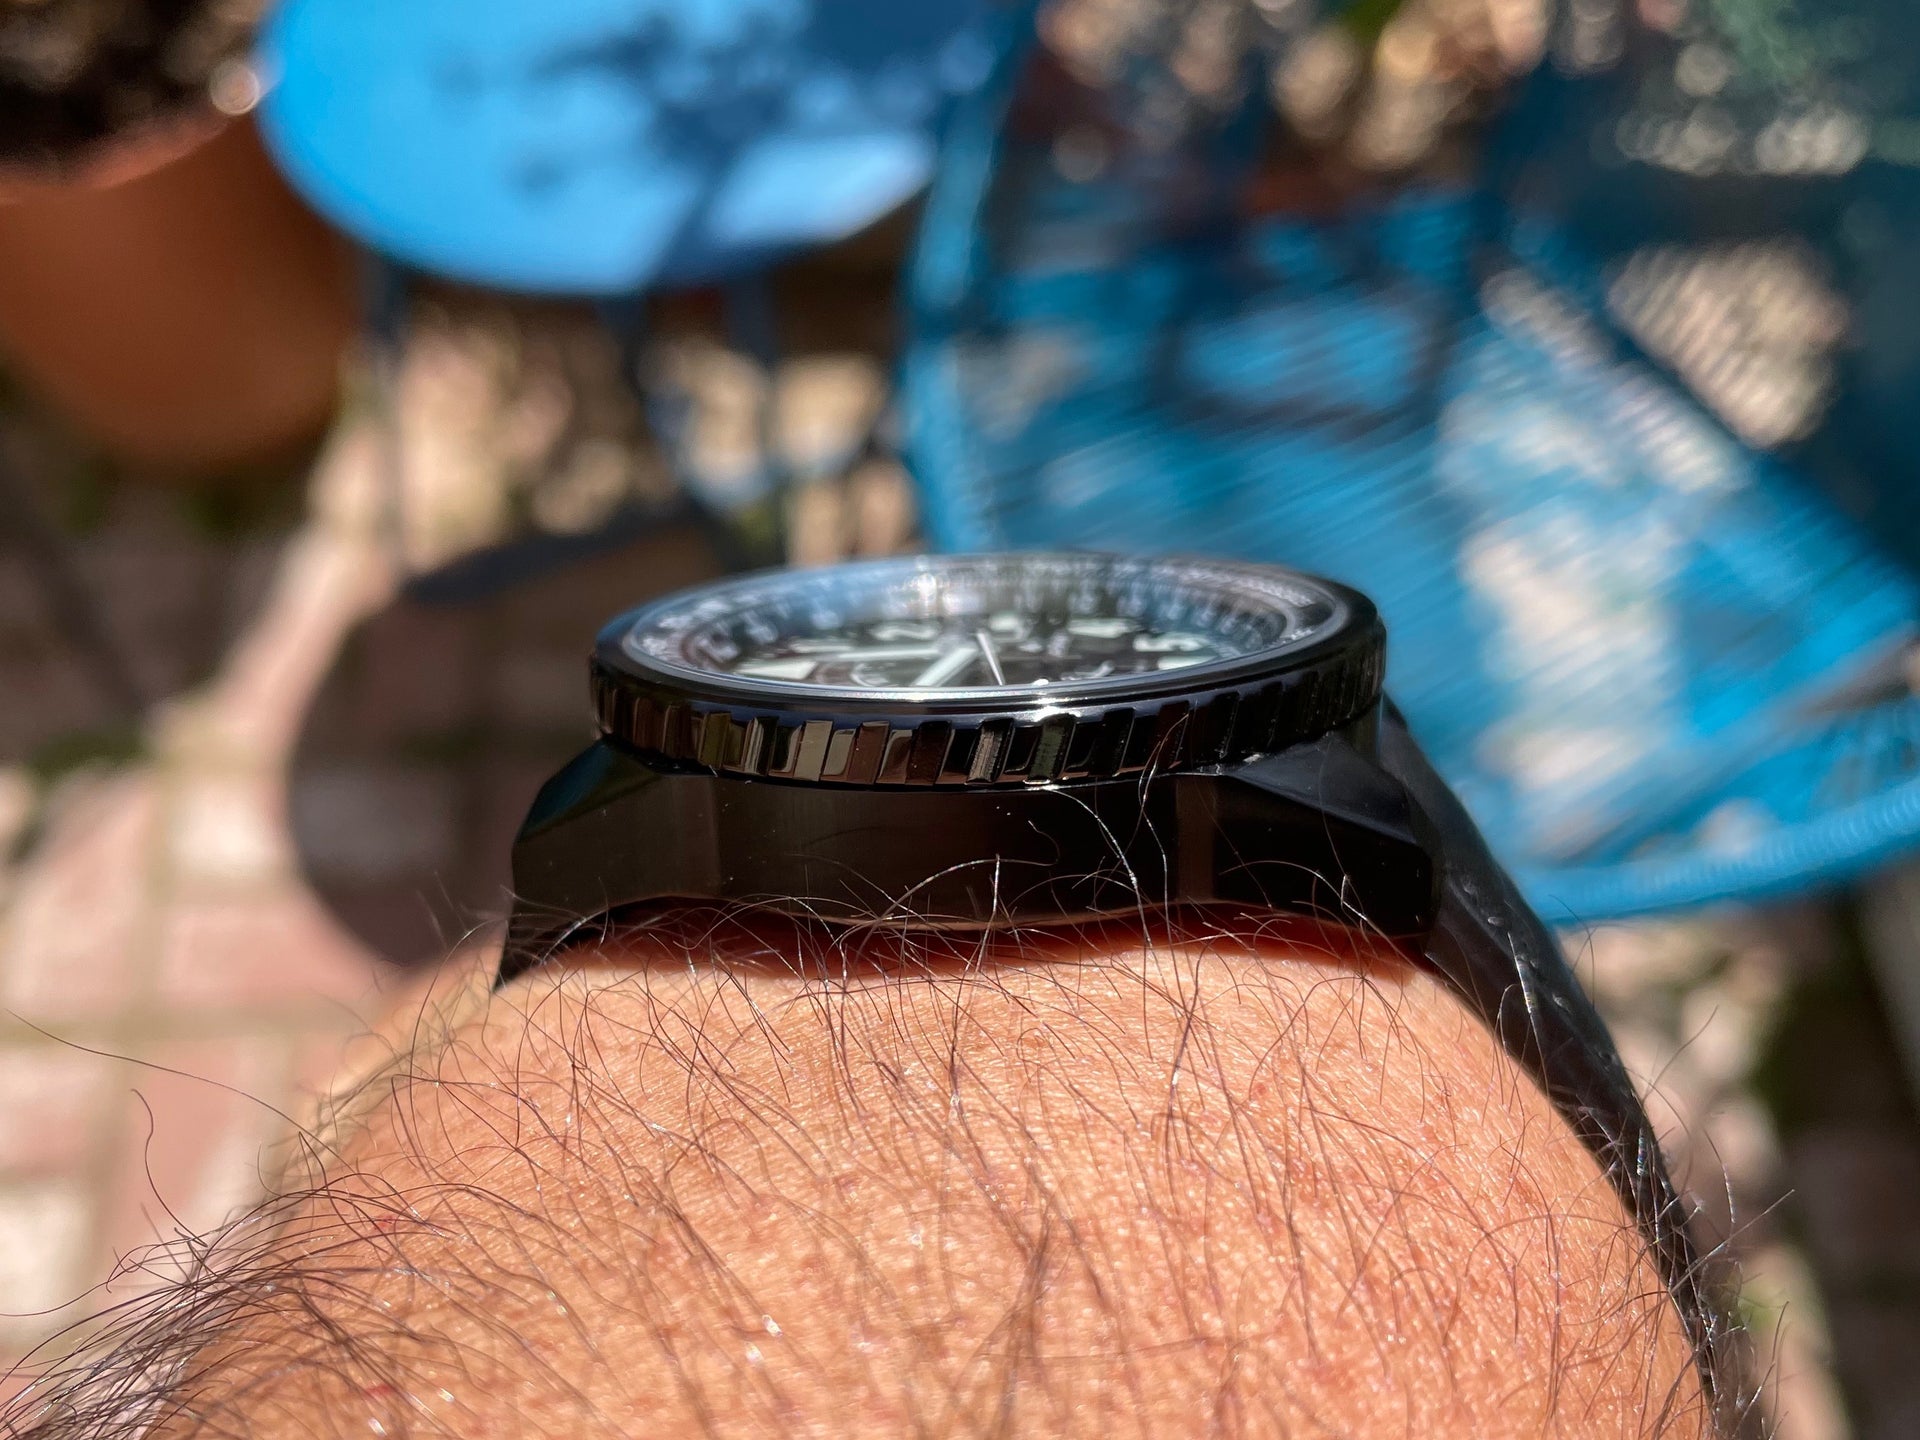 Citizen Promaster Nighthawk 2020 Release BJ7135-02E Review (My